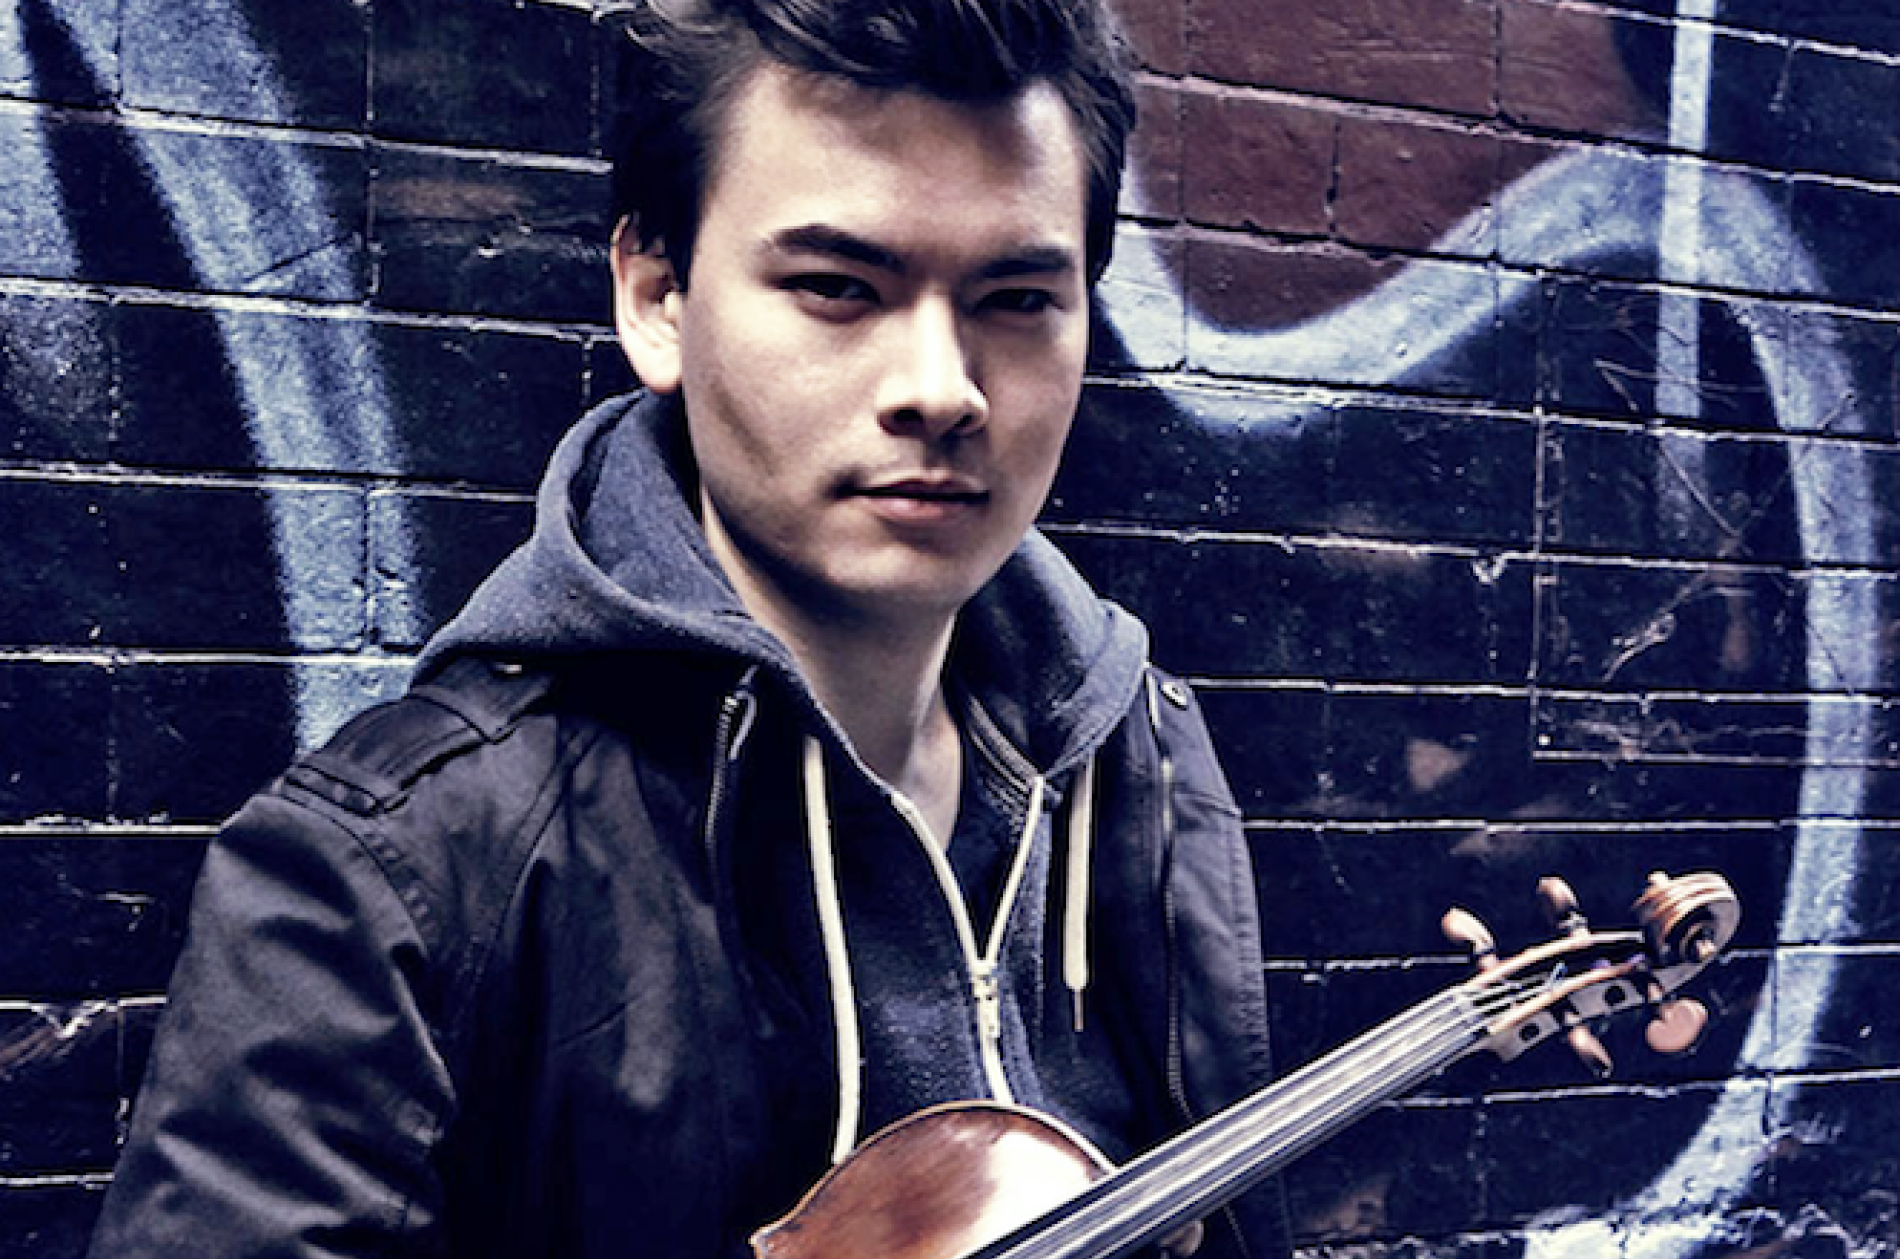 Stefan Jackiw holding a violin in front of a wall of graffiti